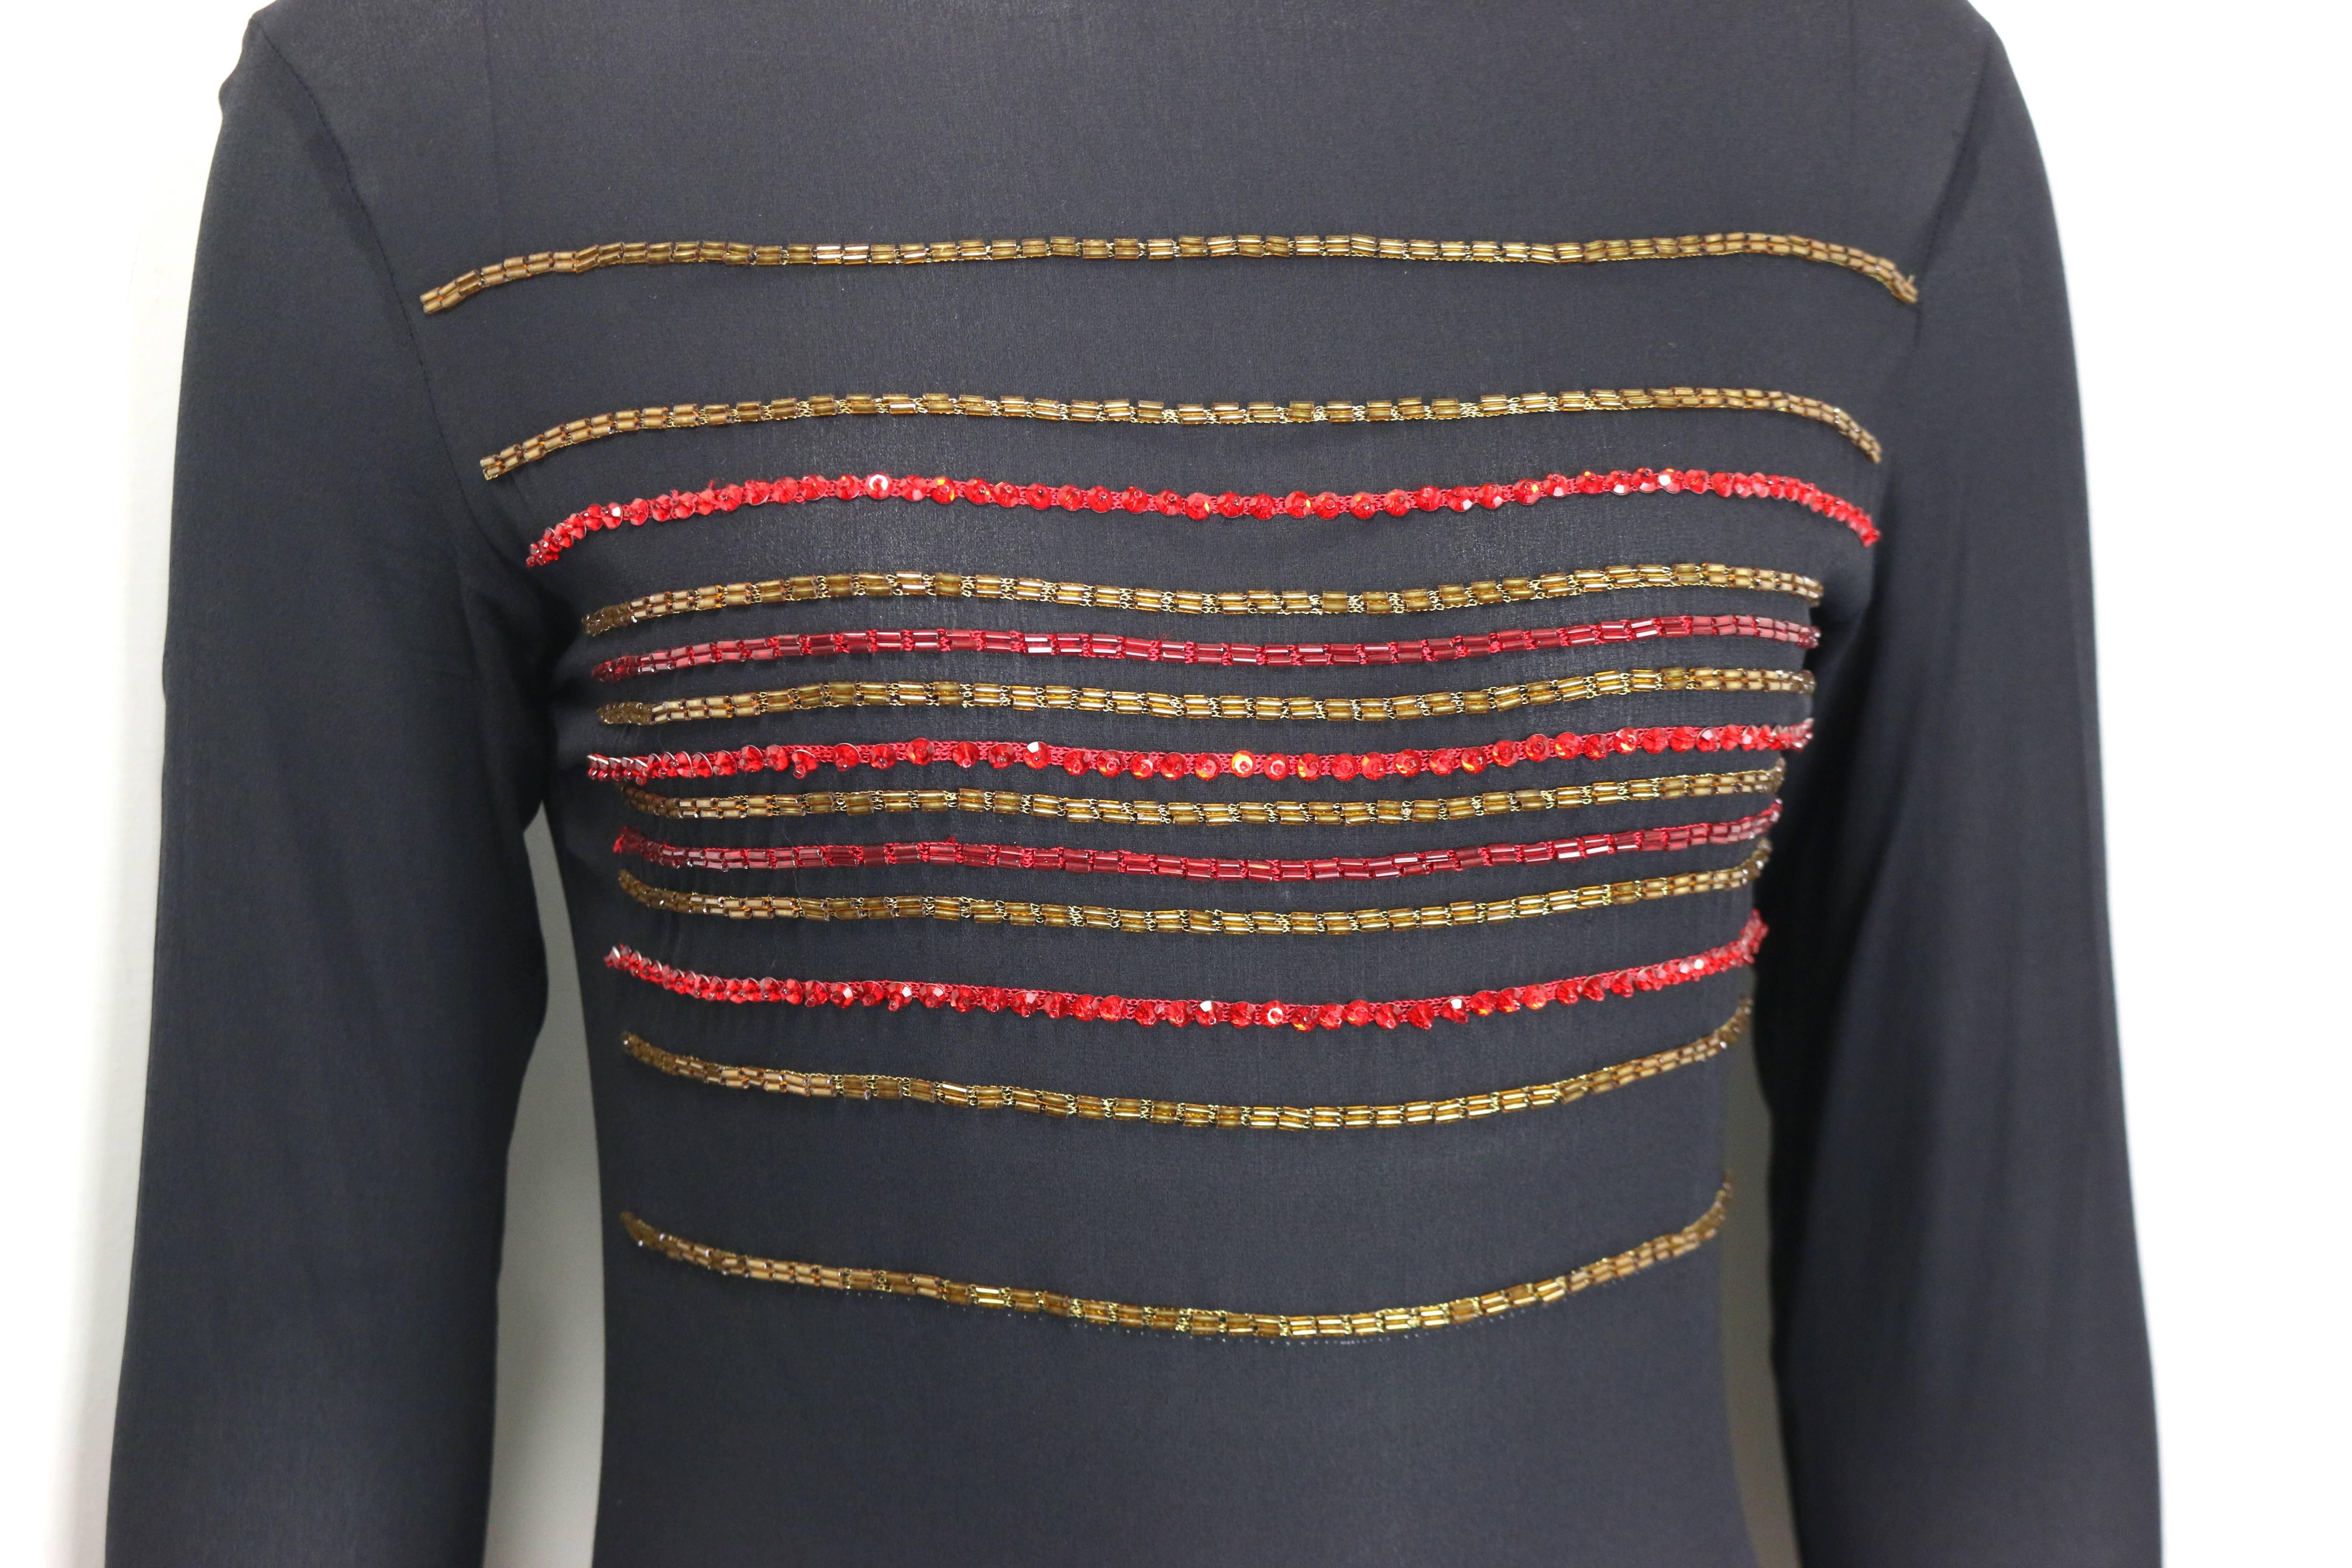 - Vintage 90s Gianni Versace couture black see through silk long sleeves bodysuit. 

- Featuring gold and red beads across the front body,  and red beads neckline trim. 

- Green and blue beads trim on the cuff with three gold toned 